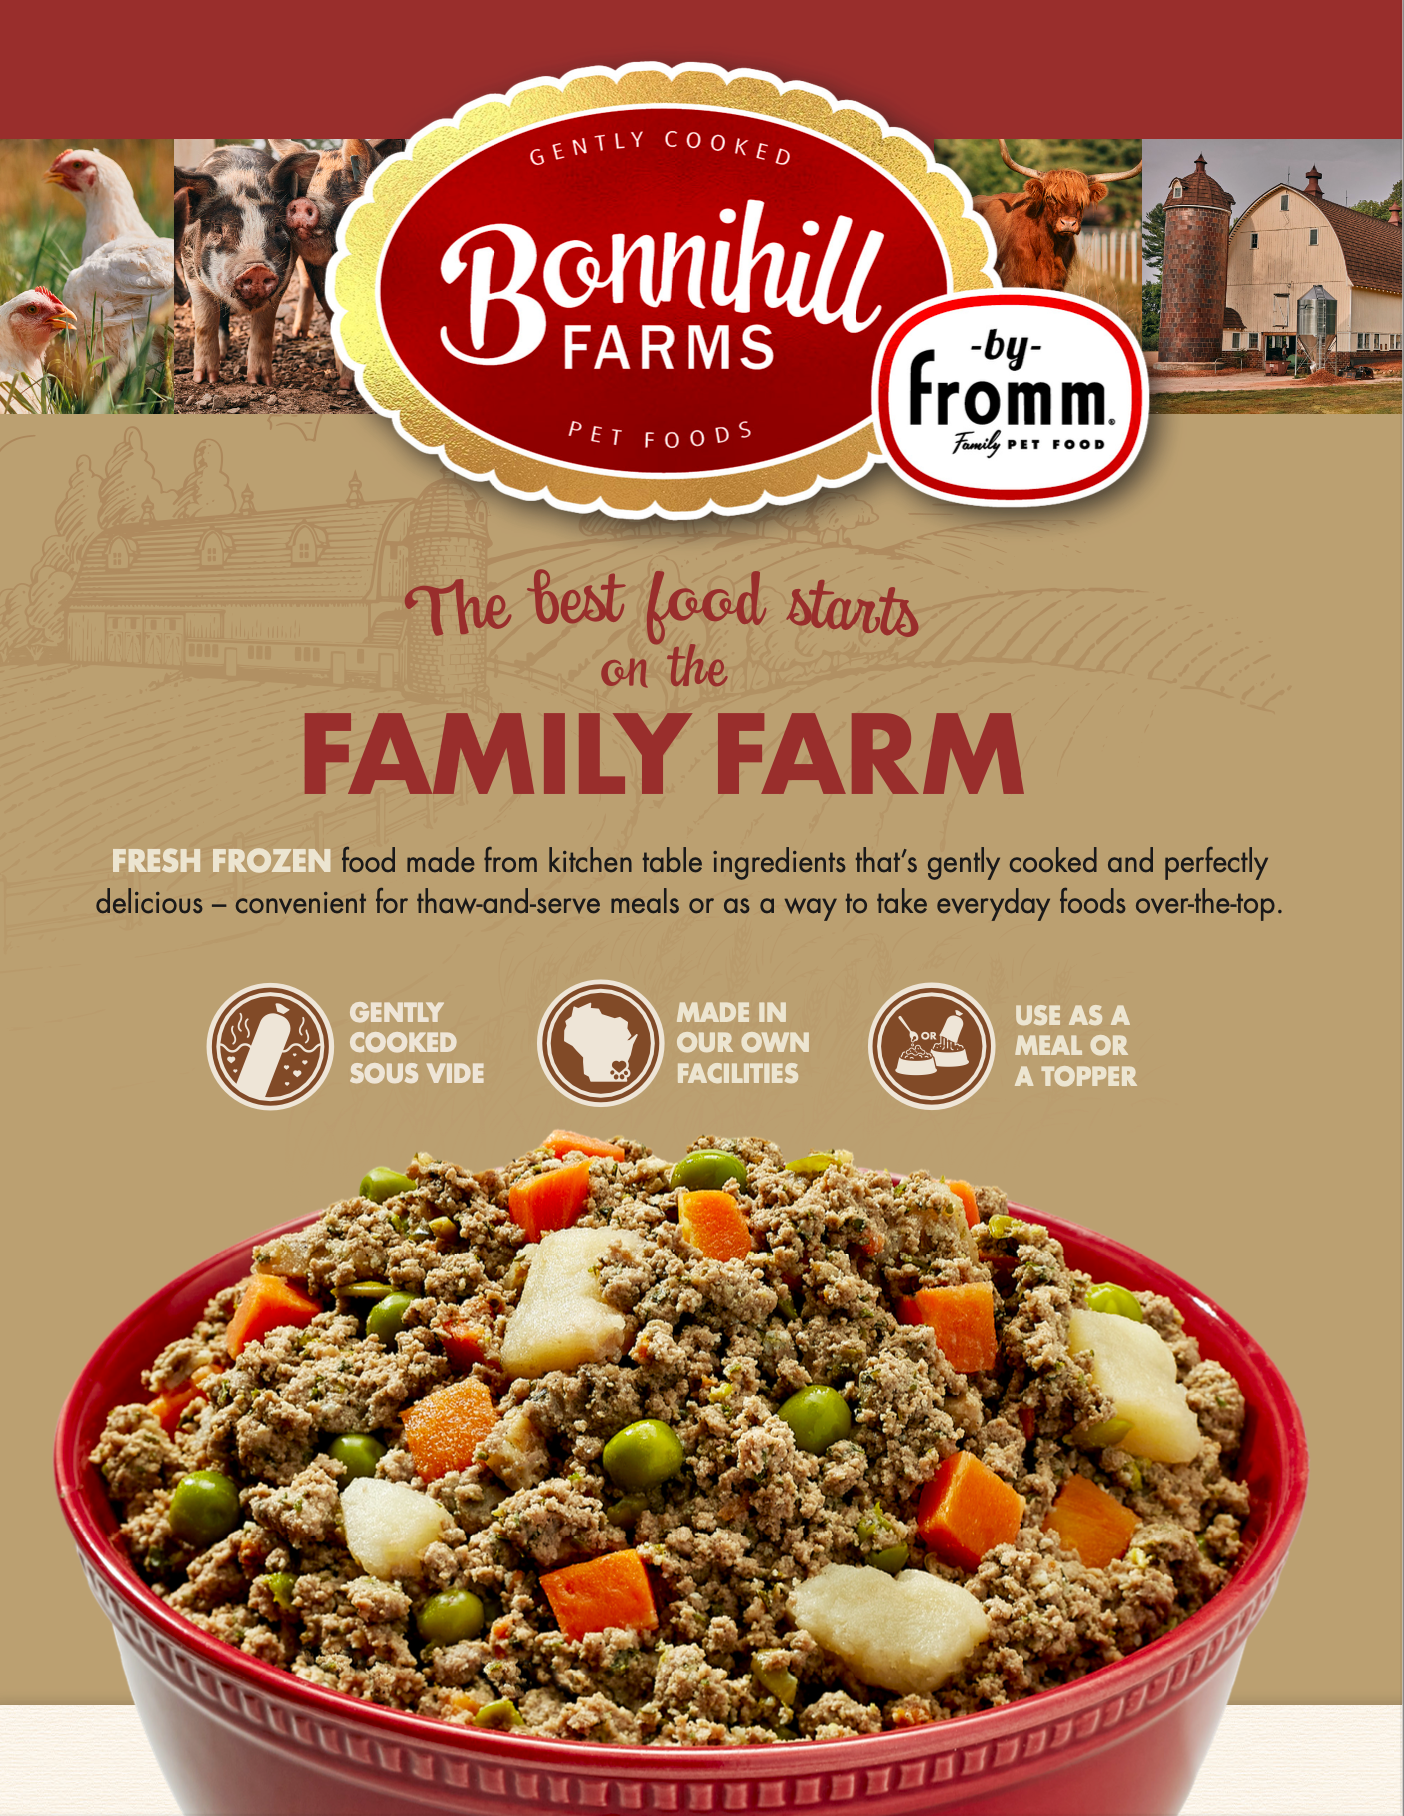 Bonnihill Farms Gently Cooked Dog Food Info Sheet 8.5x11" Double-sided (25-pack)